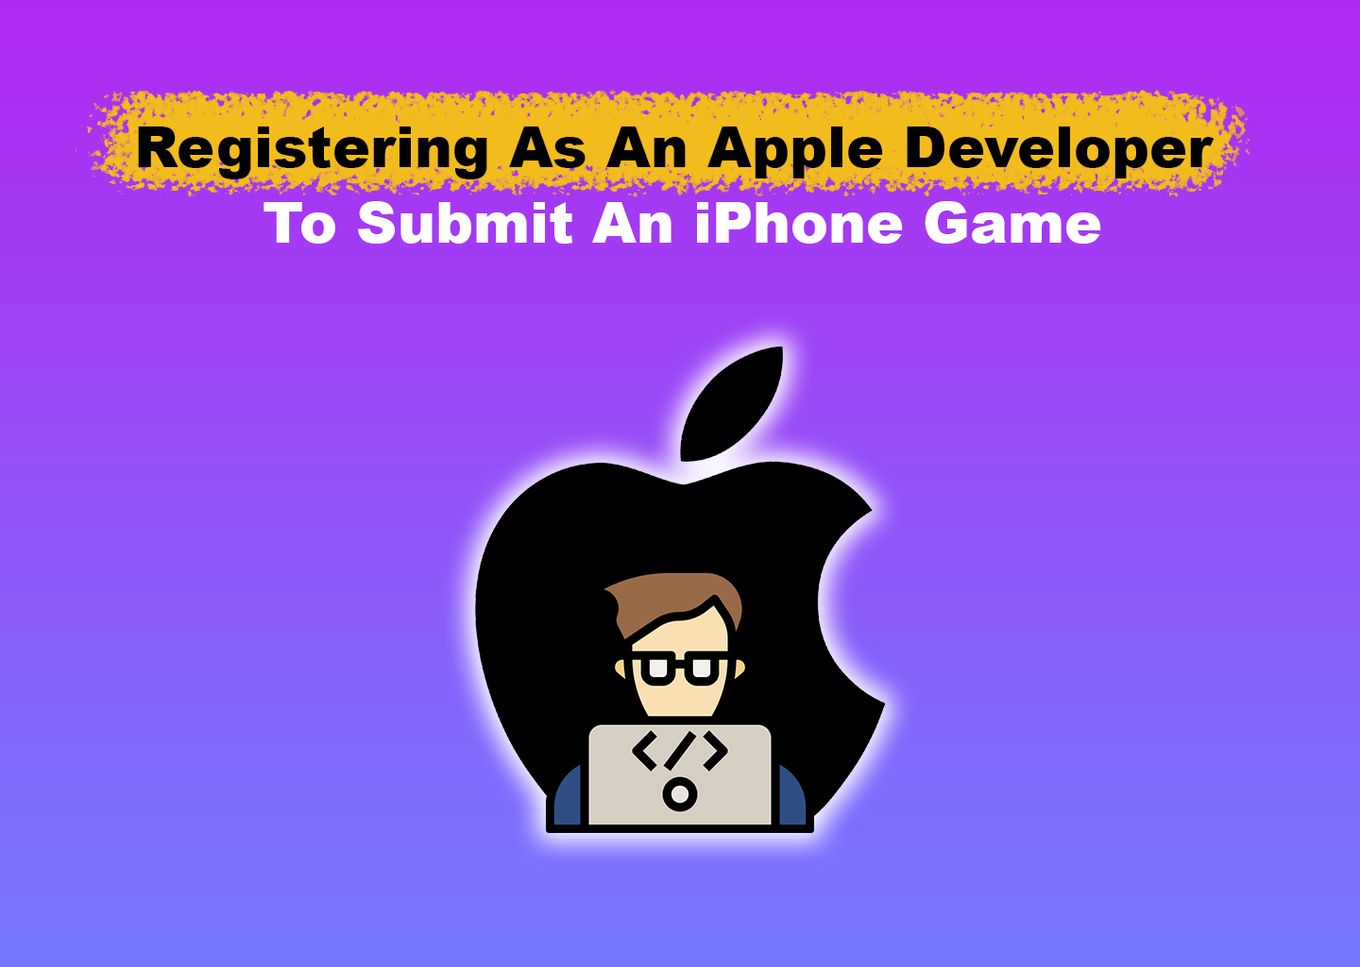 Registering as an Apple Developer to submit an iPhone game.